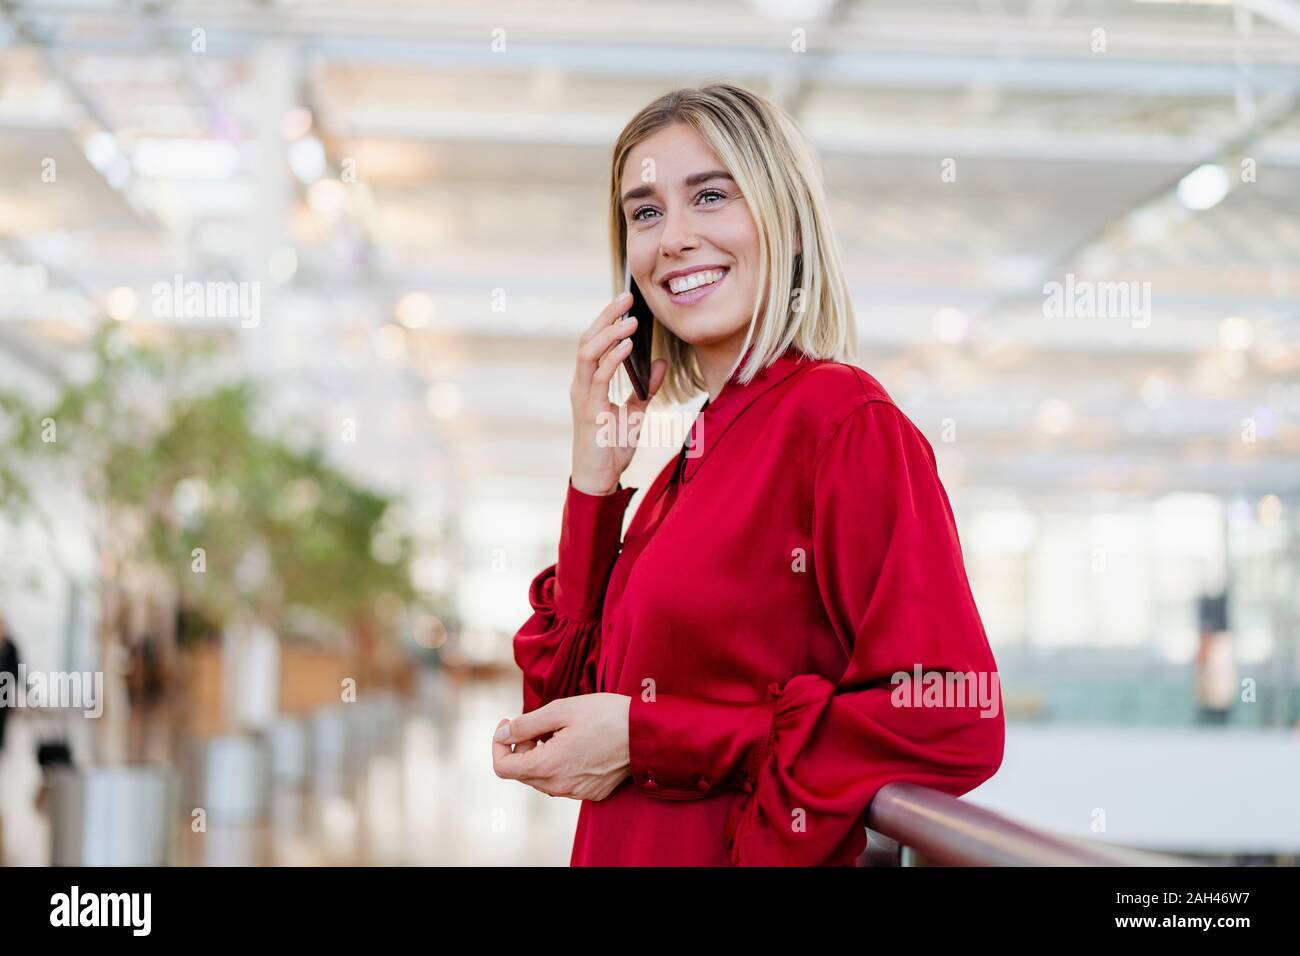 Smiling young businesswoman on the phone standing at a railing Stock Photo